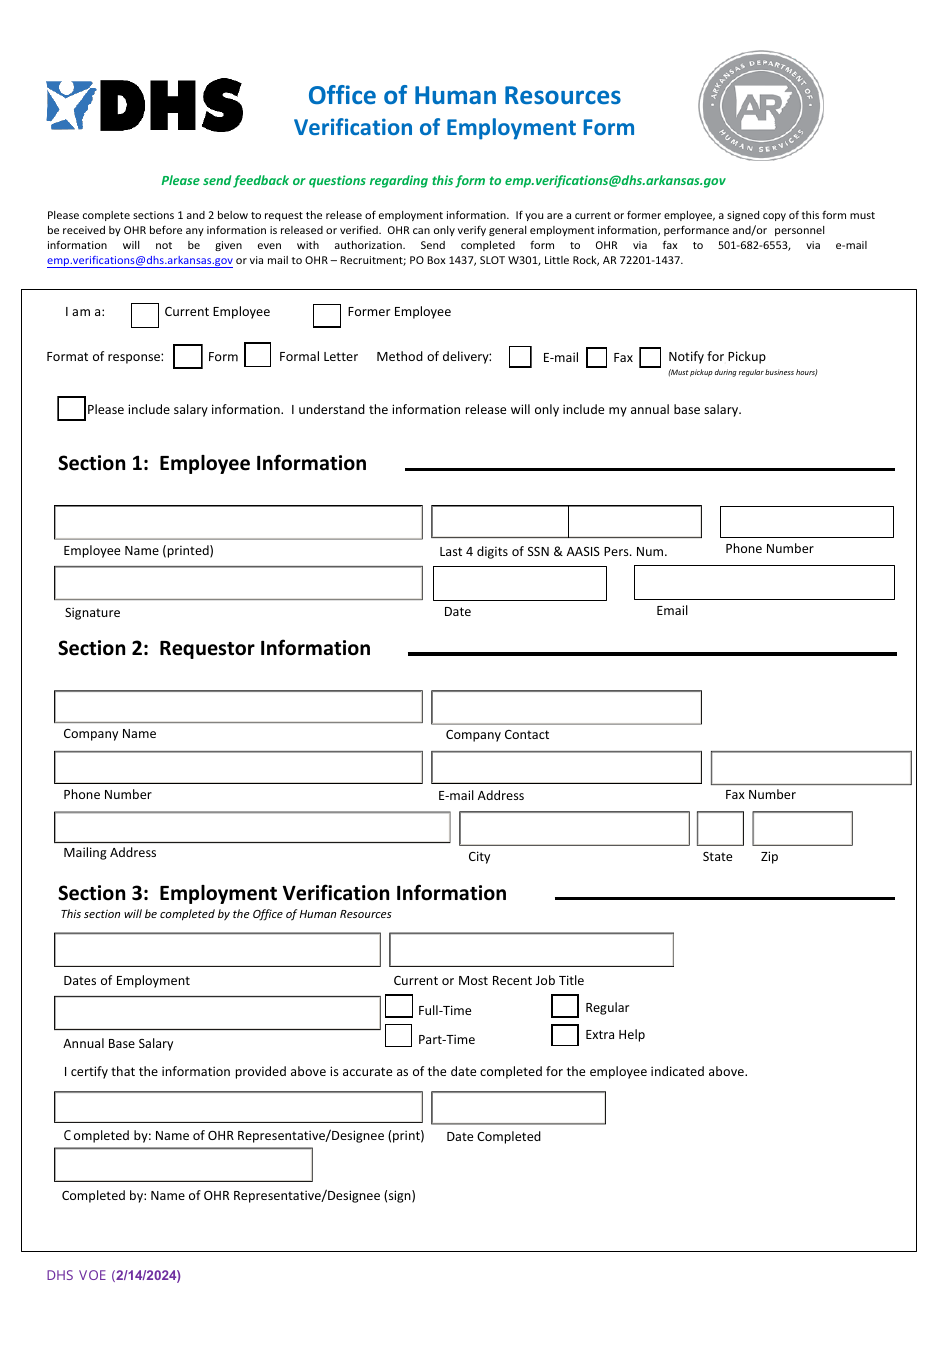 Form DHS VOE Verification of Employment Form - Arkansas, Page 1